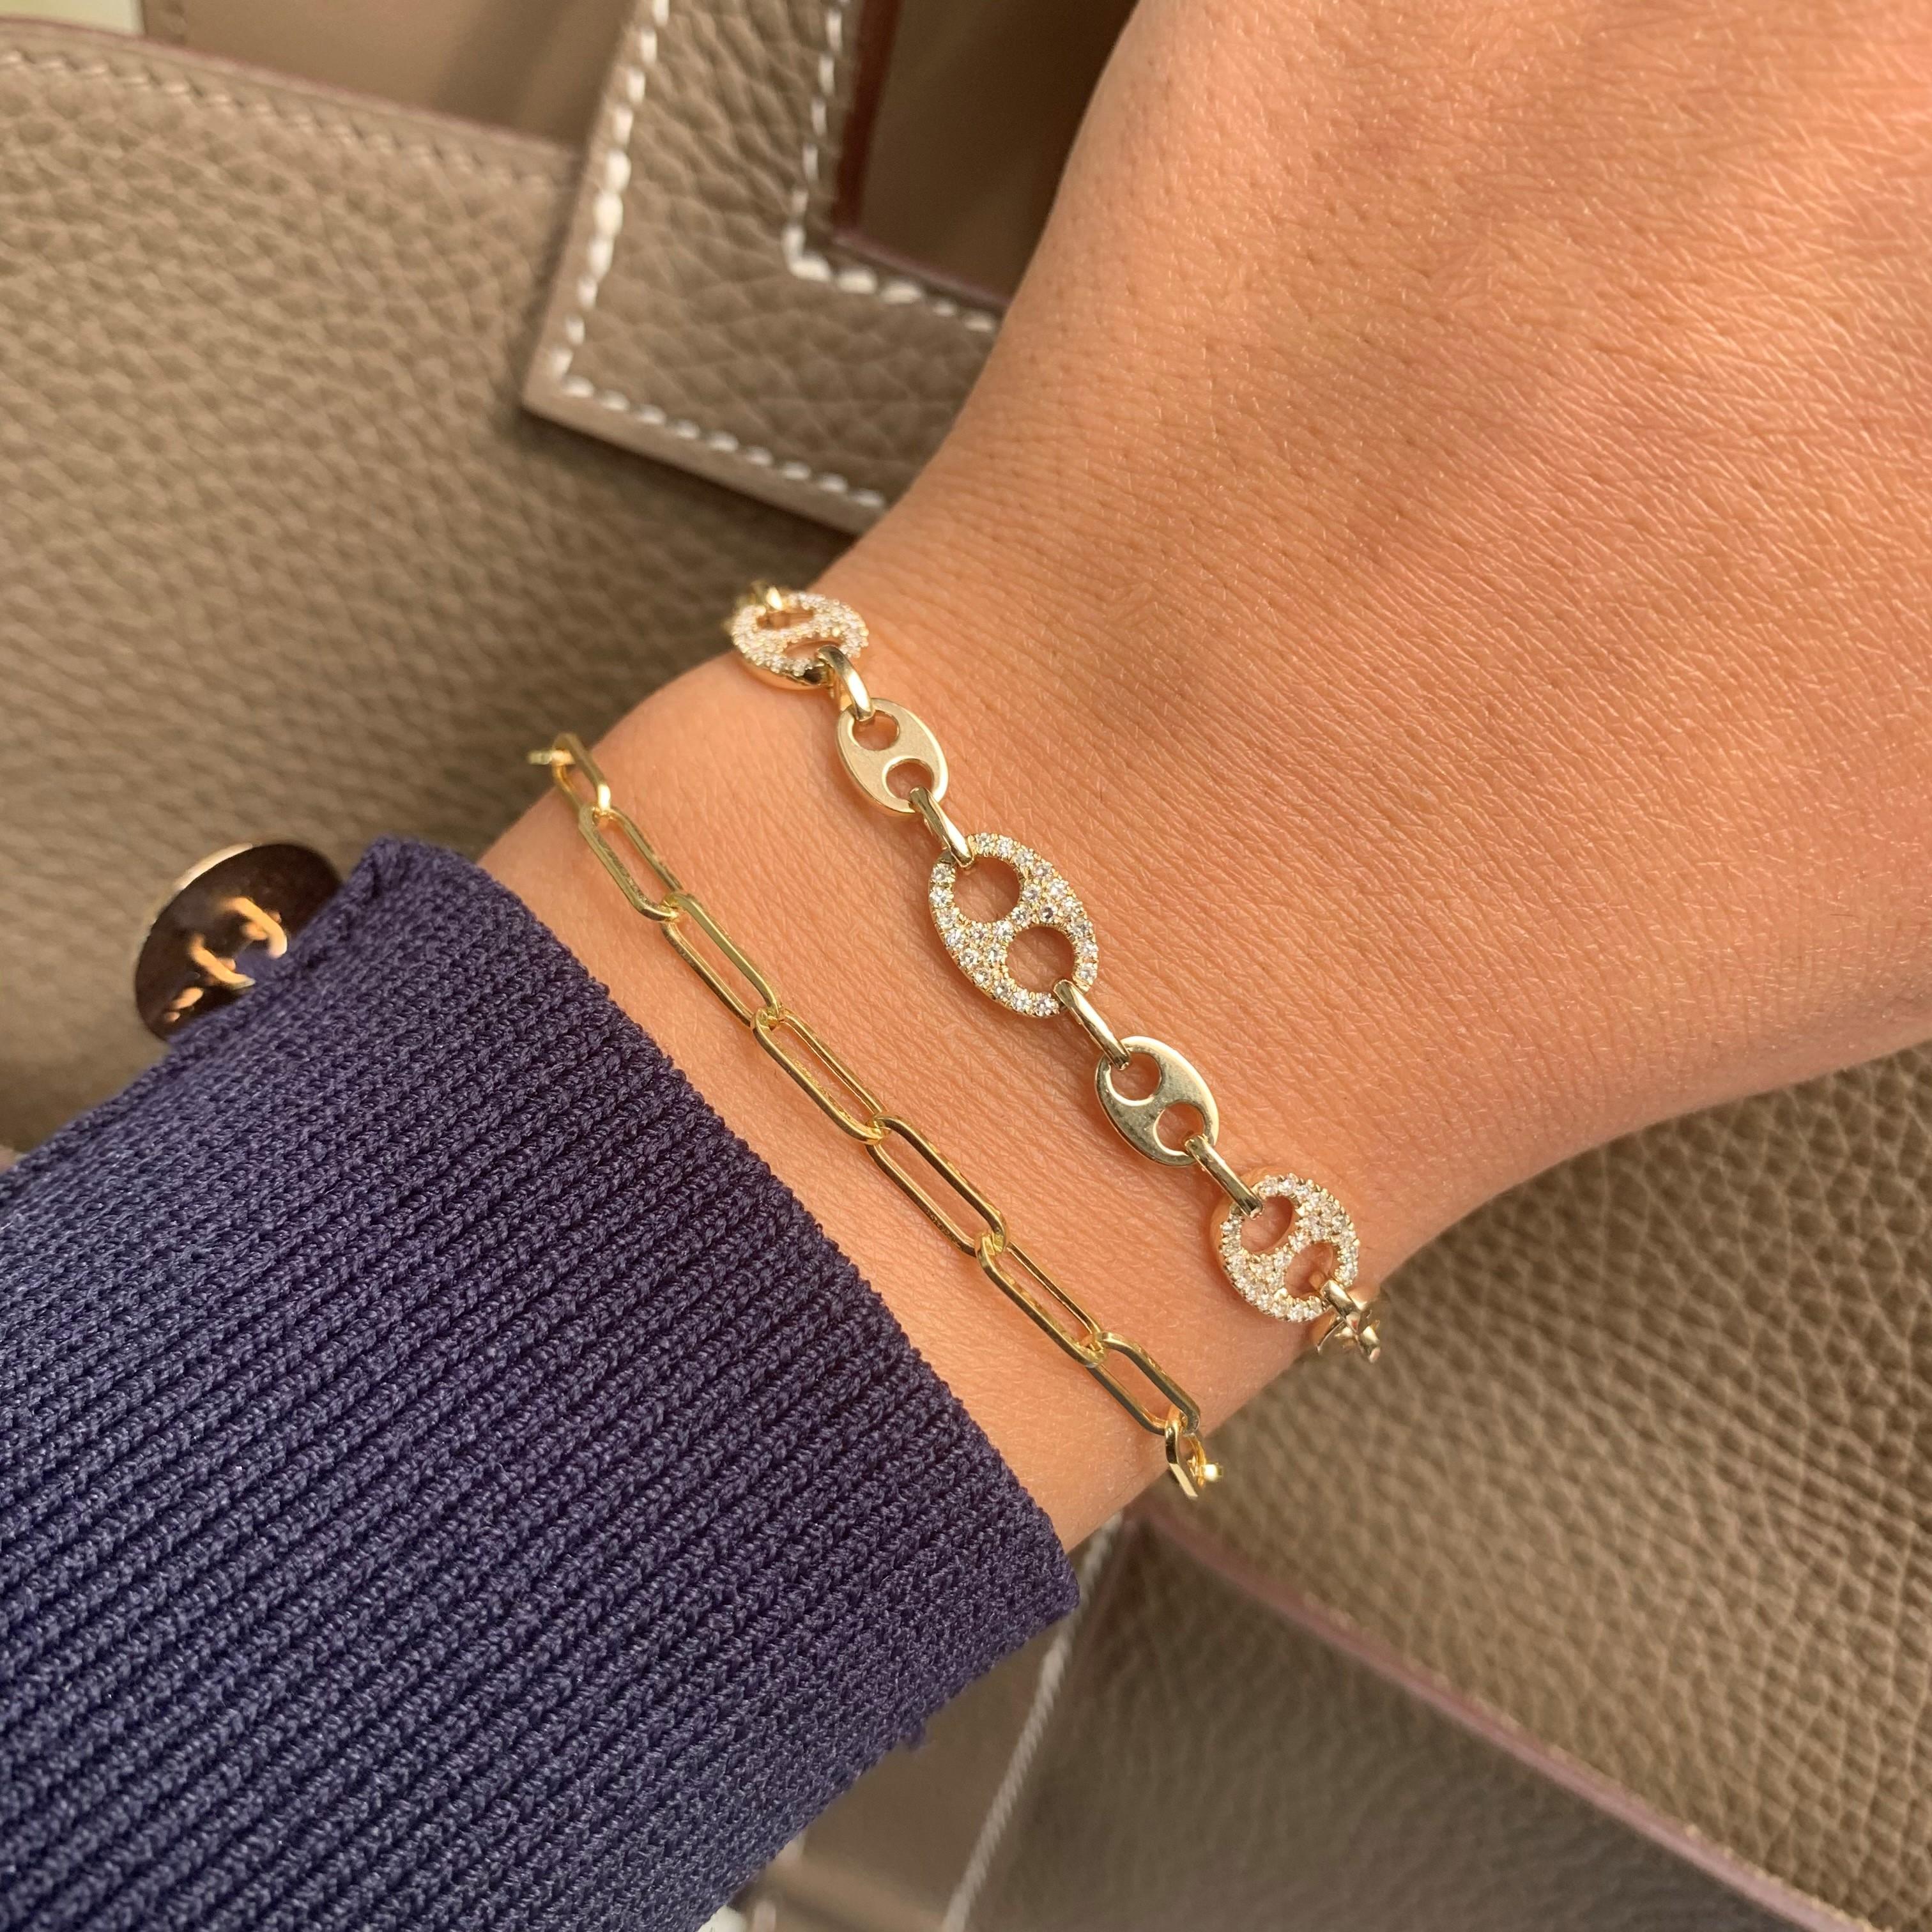 This Beautiful and Charming link bracelet will add the perfect glamour to your look! Crafted of 14K yellow gold this bracelet features 0.38cts of natural round white Diamonds, spring-ring closure. Adjustable lengths 5.75